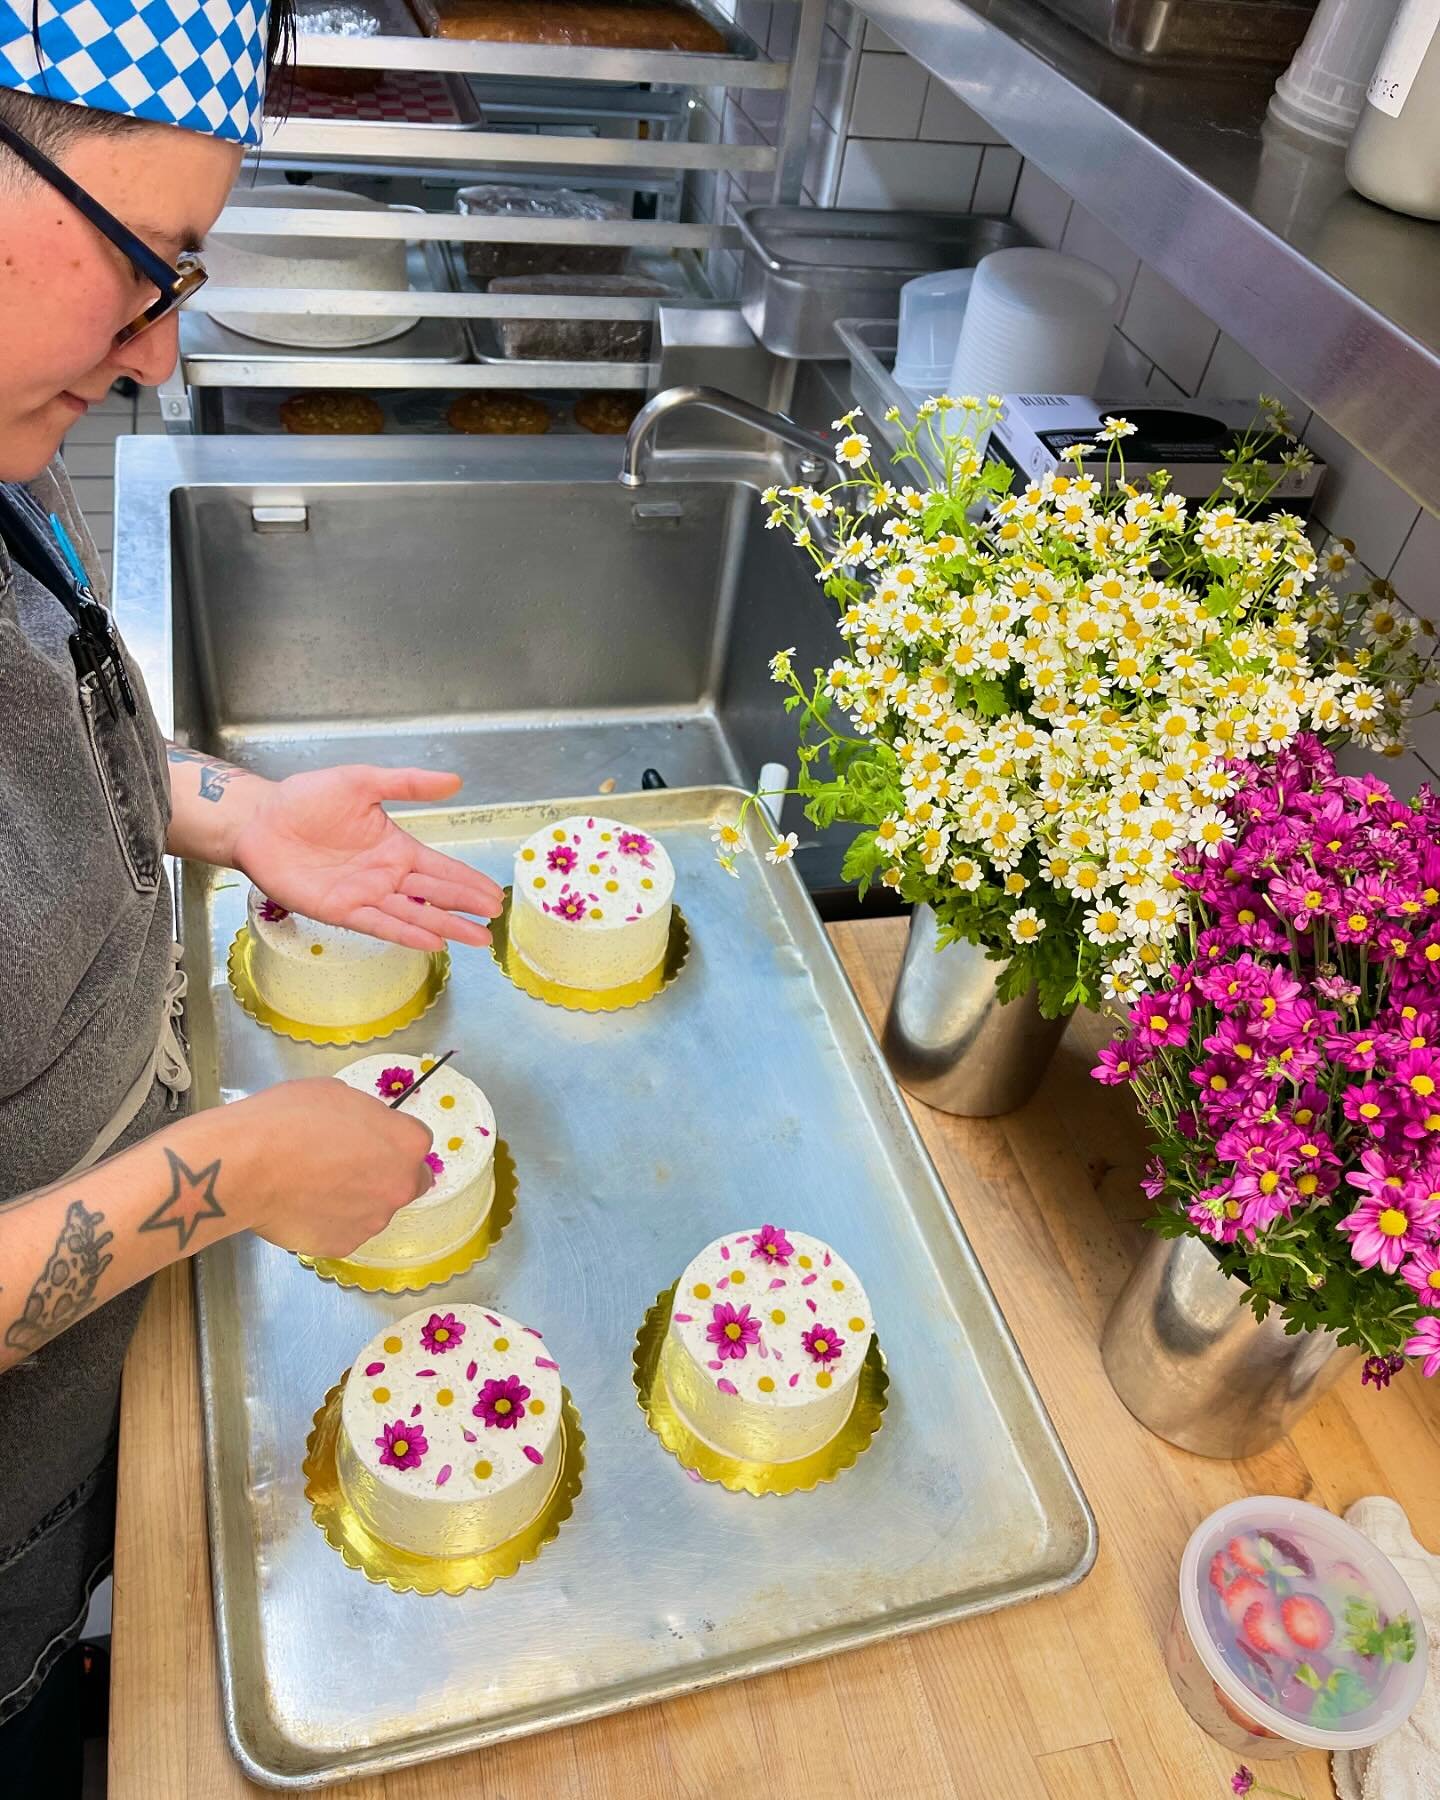 these cakes are so cute, I cry 🥹🎂💐🥹💞 @hootie57 and @saam.robinson put out a most extra pastry case this morning (mango tres leches cake almost ready!)

happy mamas day 💜 the little cake is a today-only special 💜 lavender milk tea sponge cake w